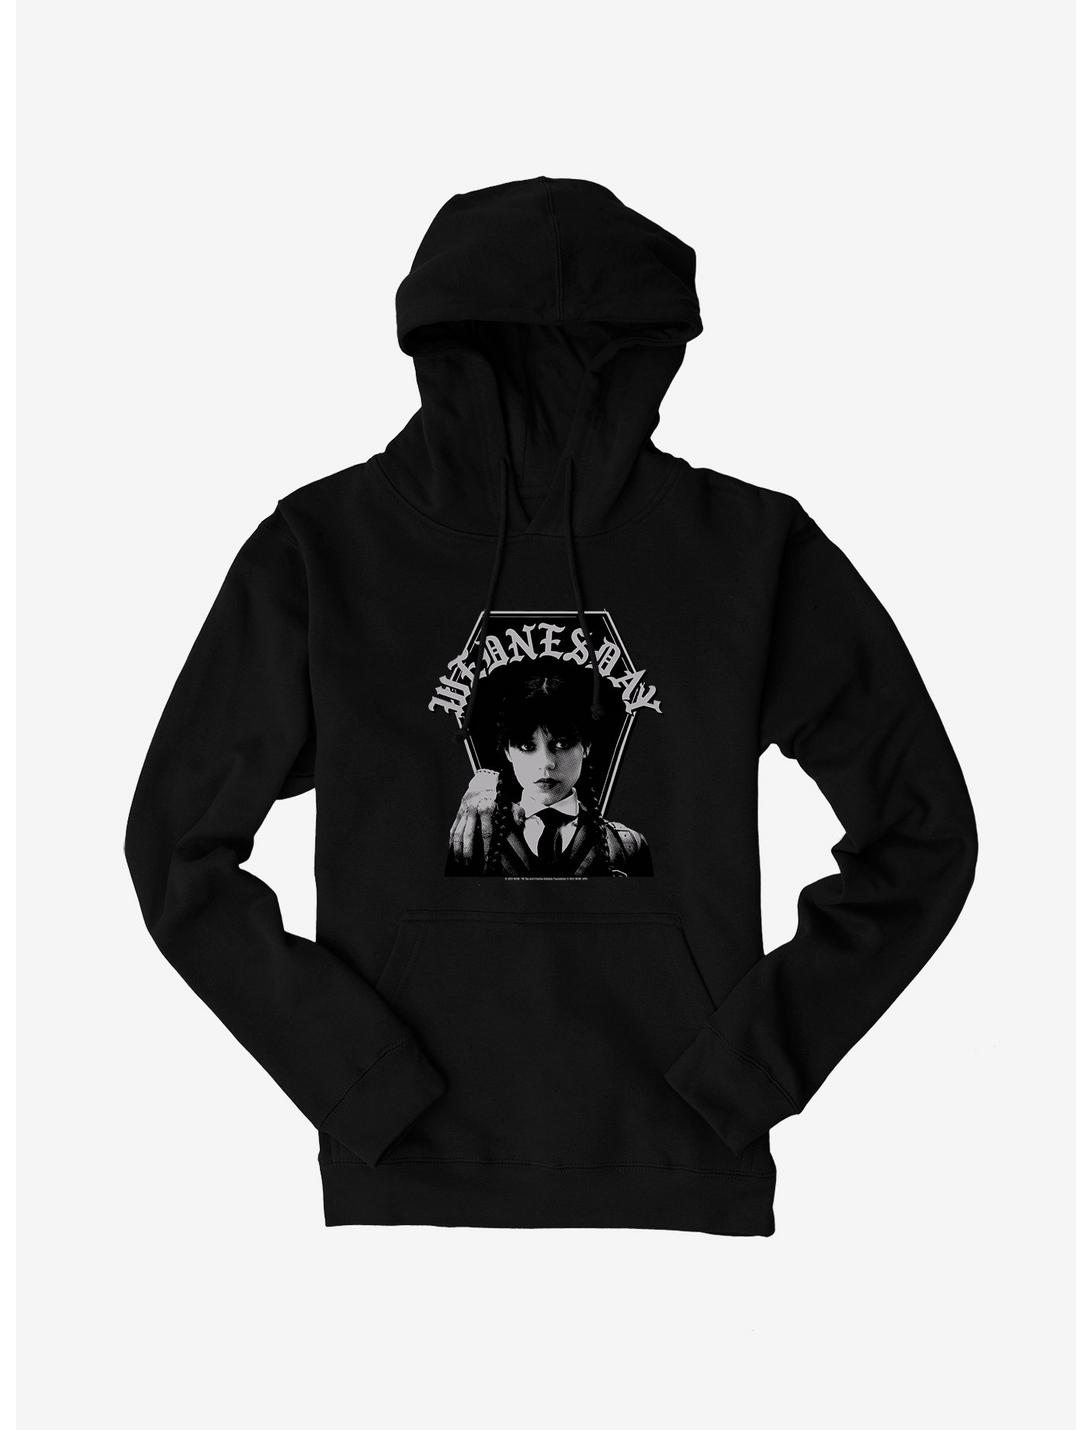 Wednesday Thing And Wednesday Portrait Hoodie, BLACK, hi-res